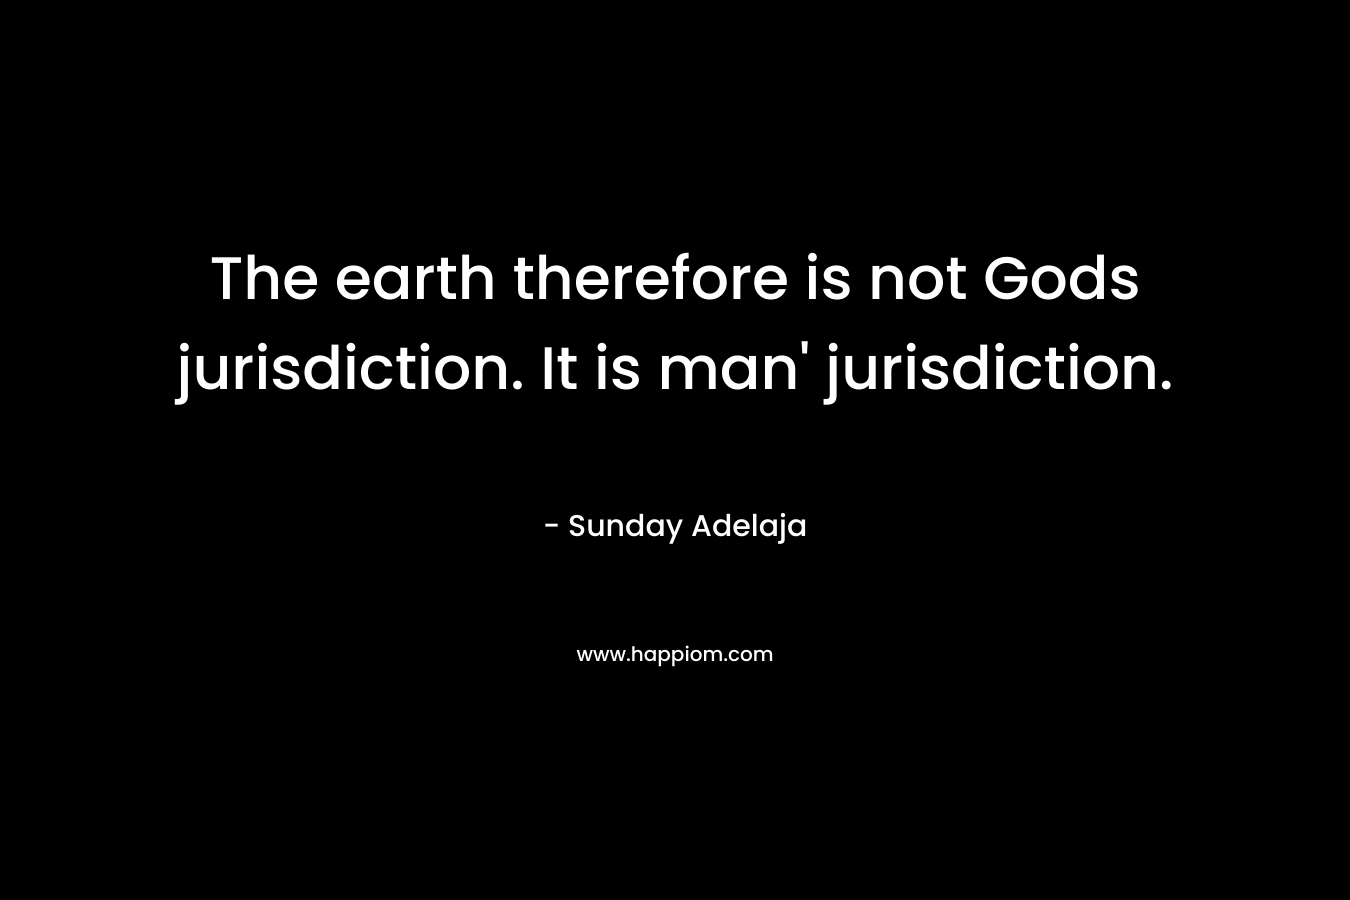 The earth therefore is not Gods jurisdiction. It is man' jurisdiction.